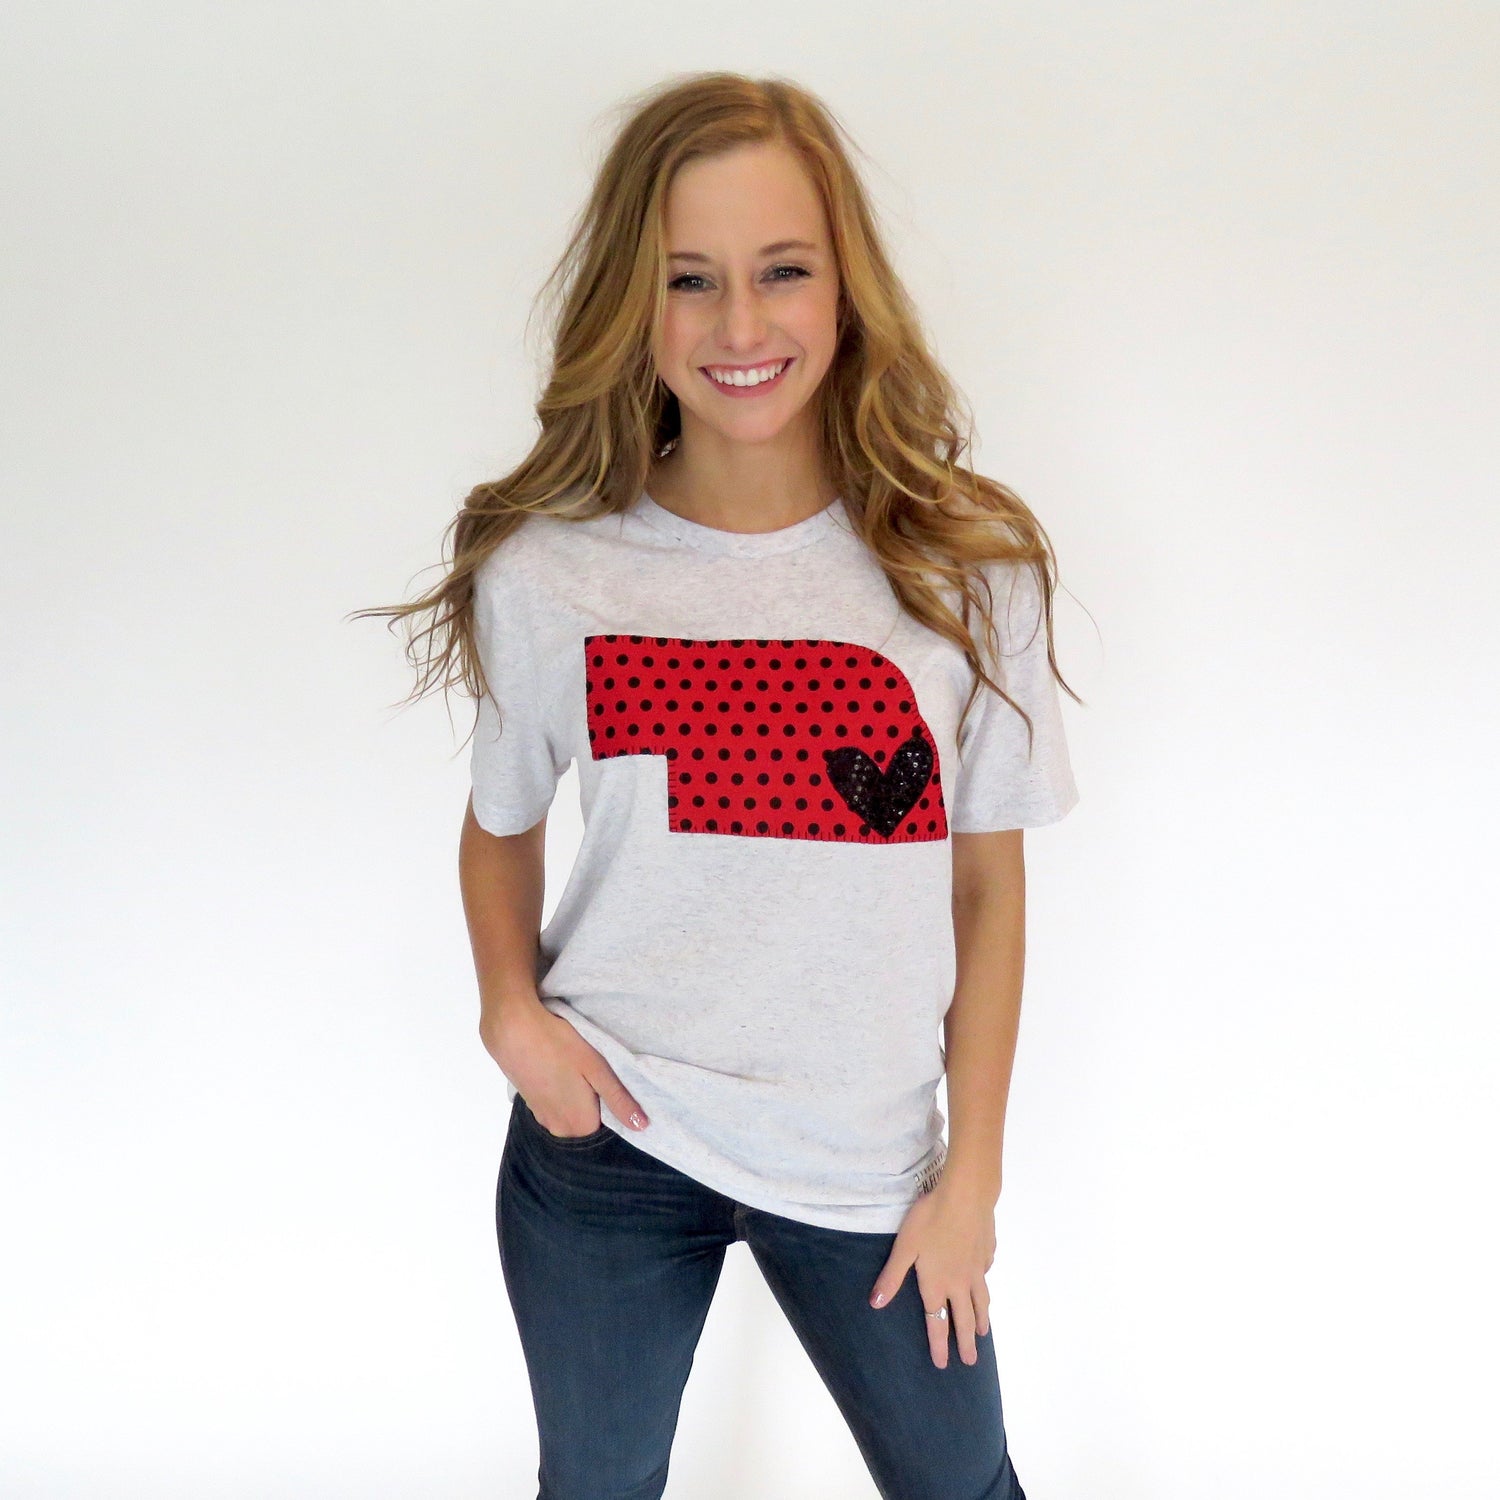 Light Grey Tee Shirt - Red State with Black Heart